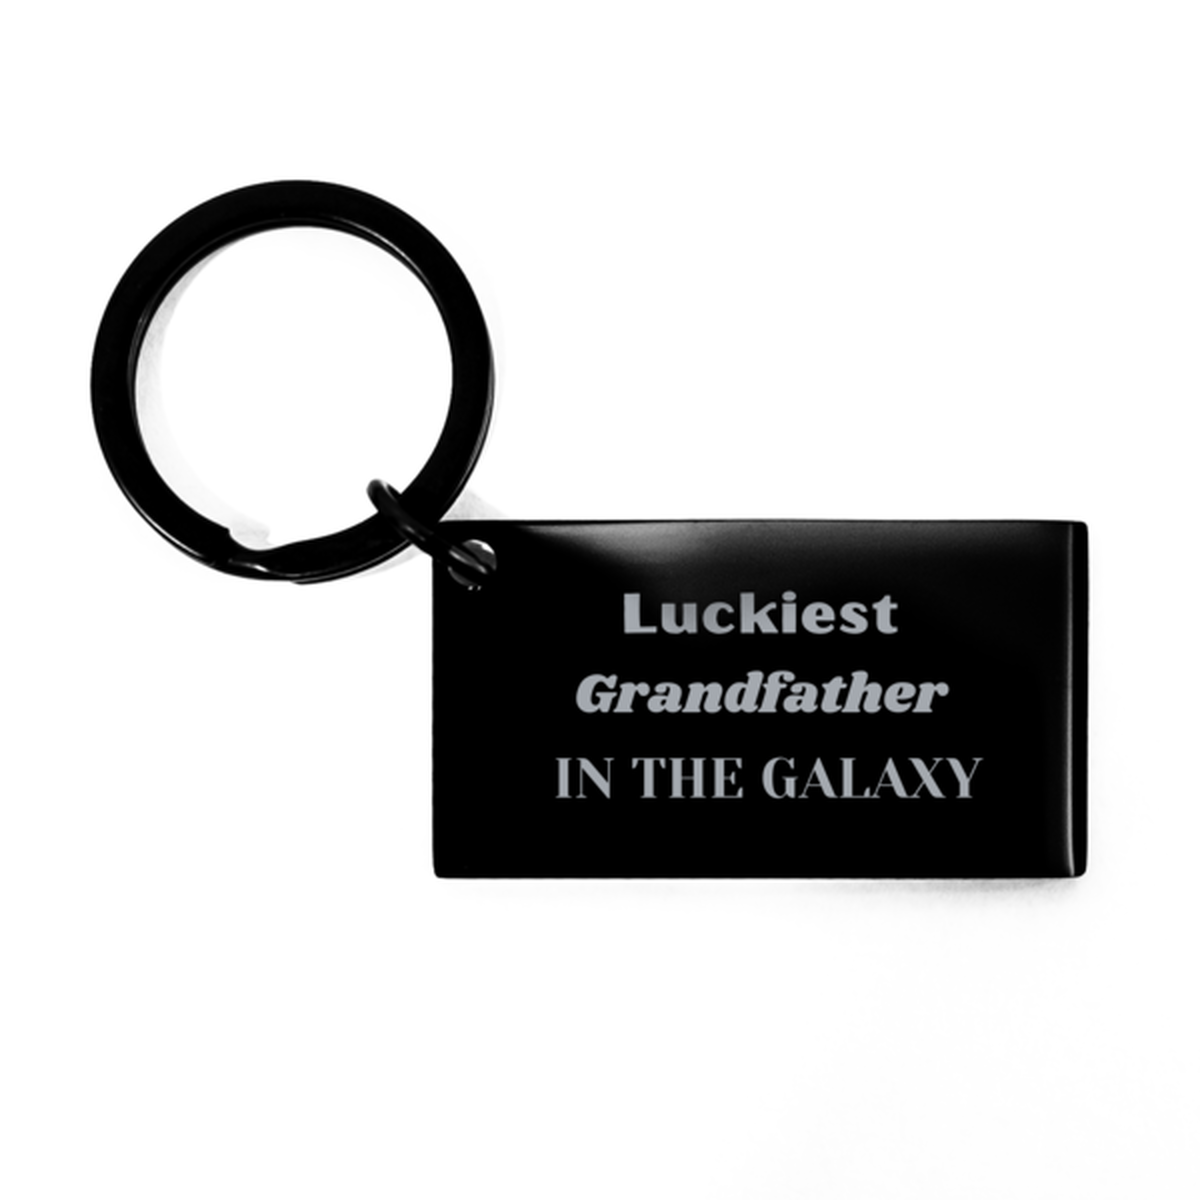 Luckiest Grandfather in the Galaxy, To My Grandfather Engraved Gifts, Christmas Grandfather Keychain Gifts, X-mas Birthday Unique Gifts For Grandfather Men Women